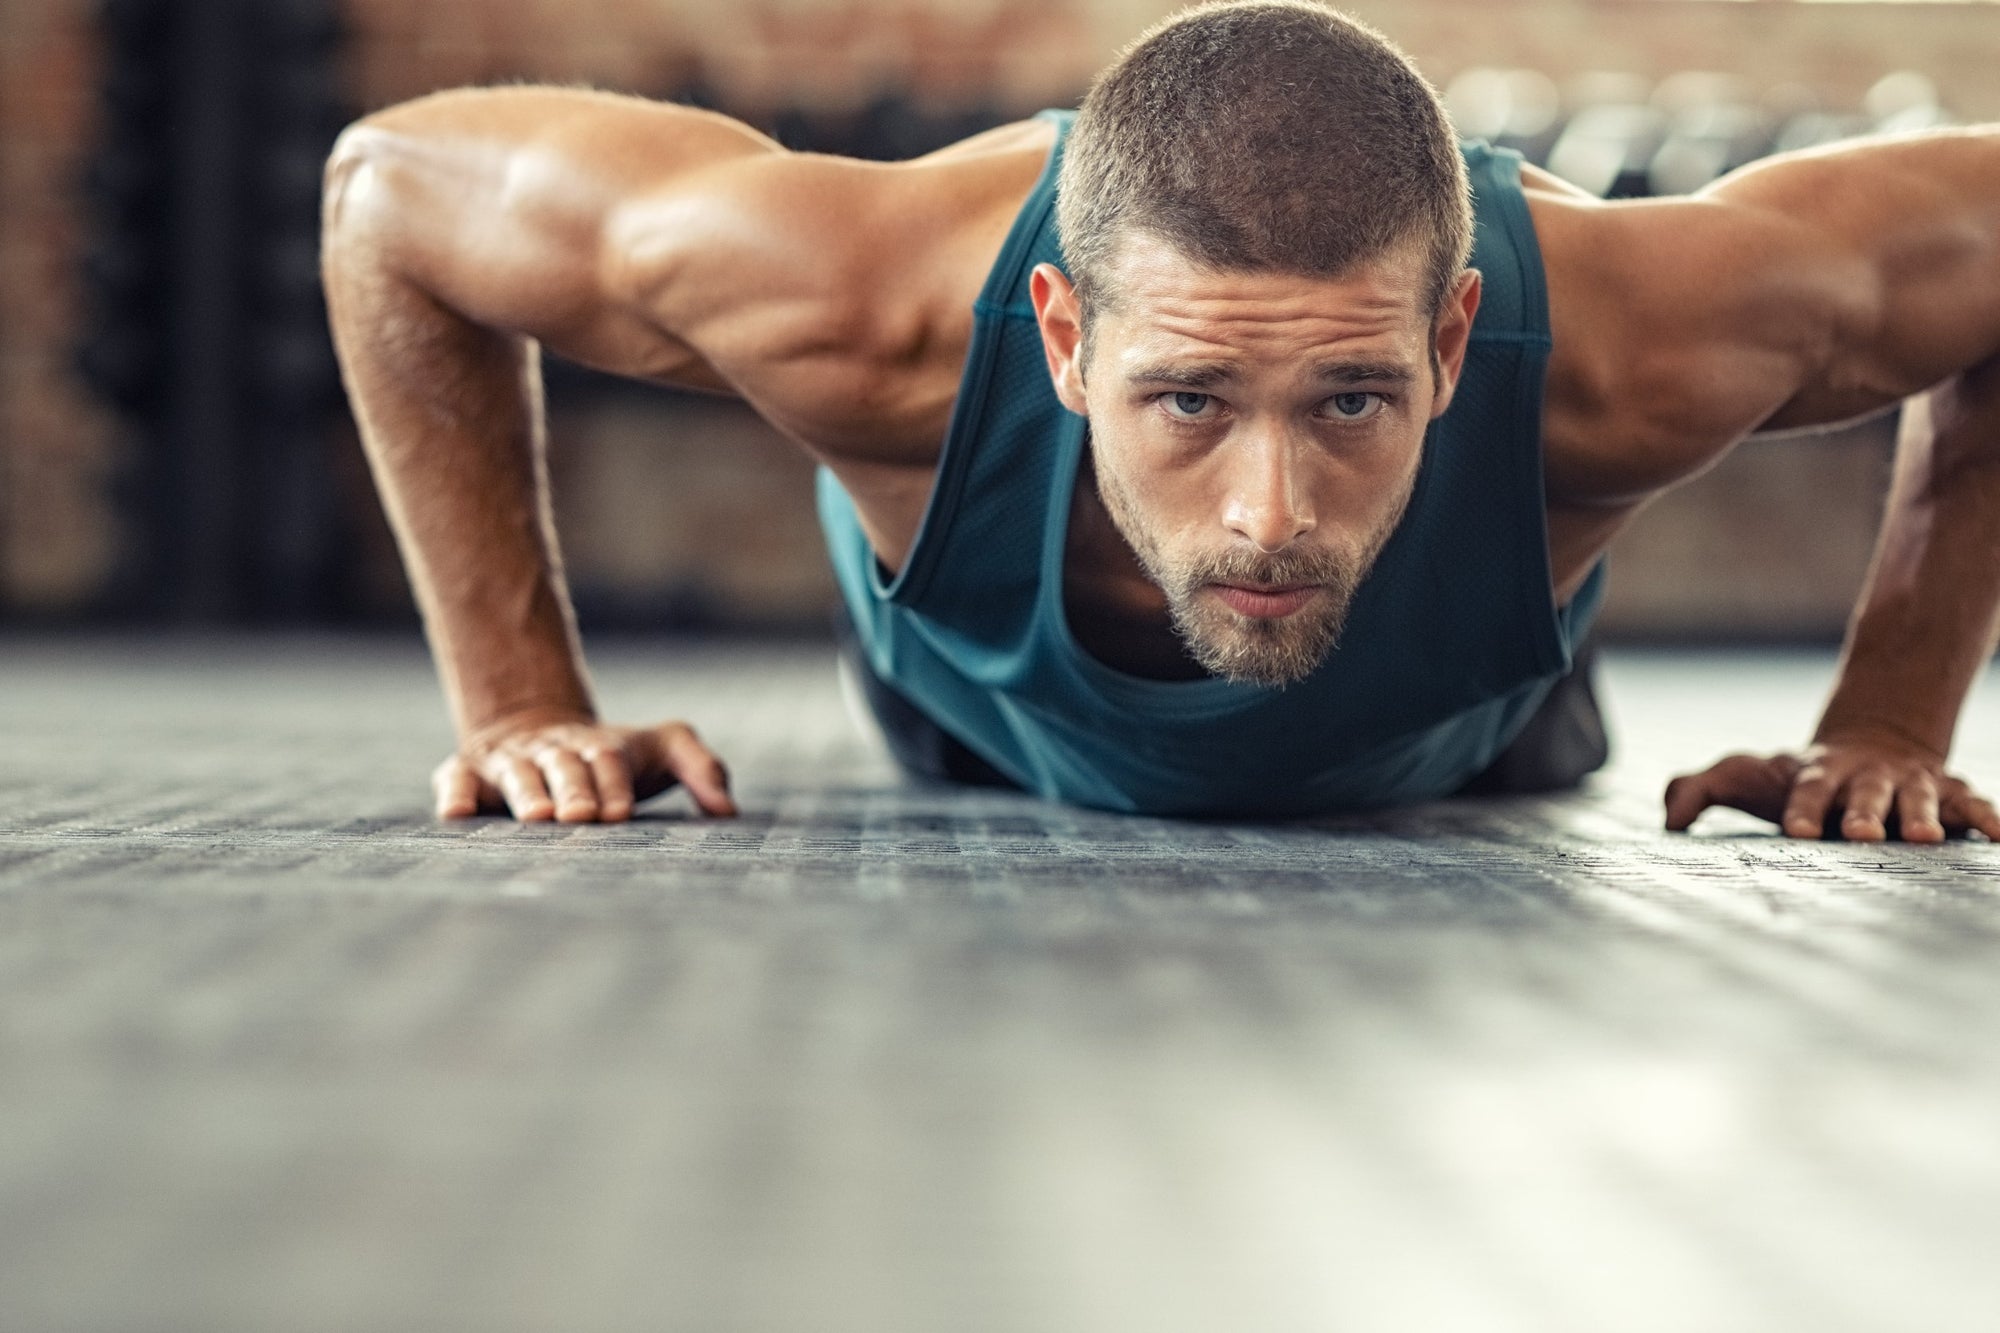 Why do I have shoulder pain after doing push-ups?